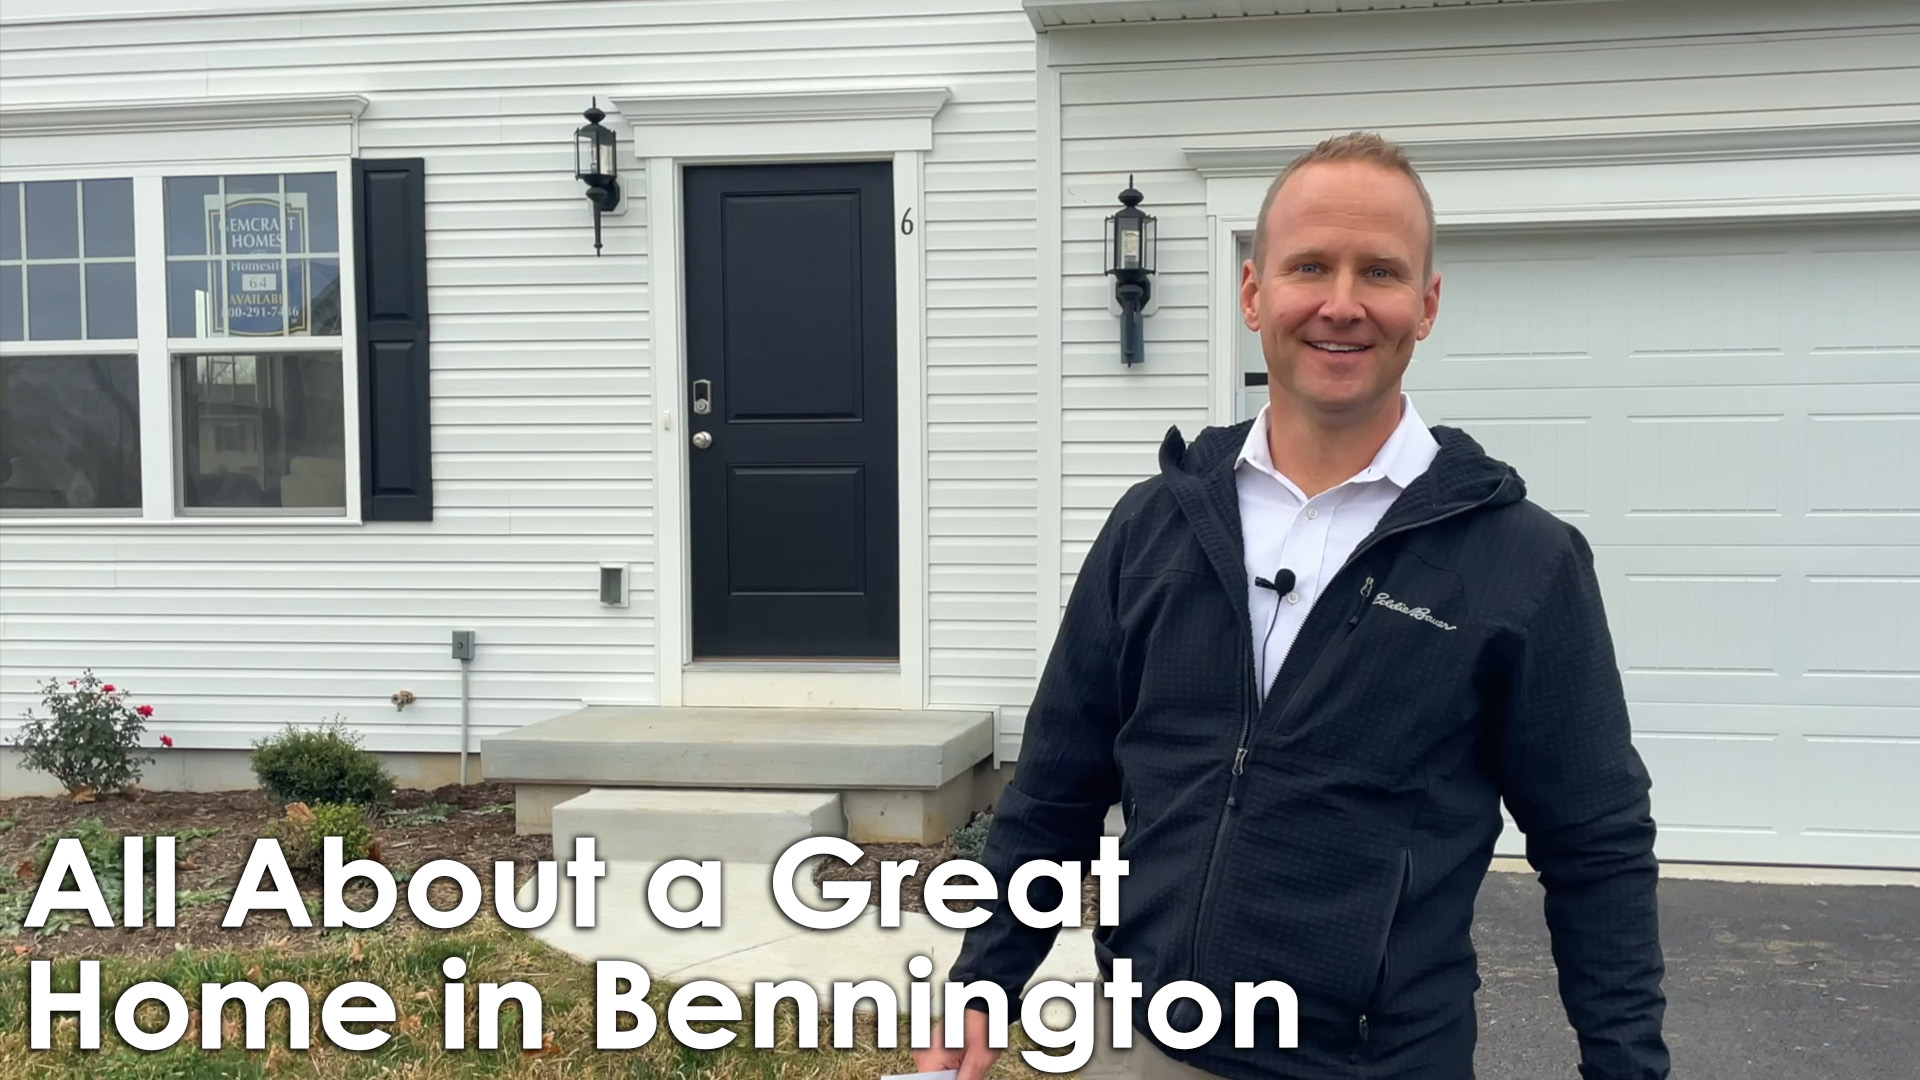 Don’t Miss This Exciting Opportunity in Bennington